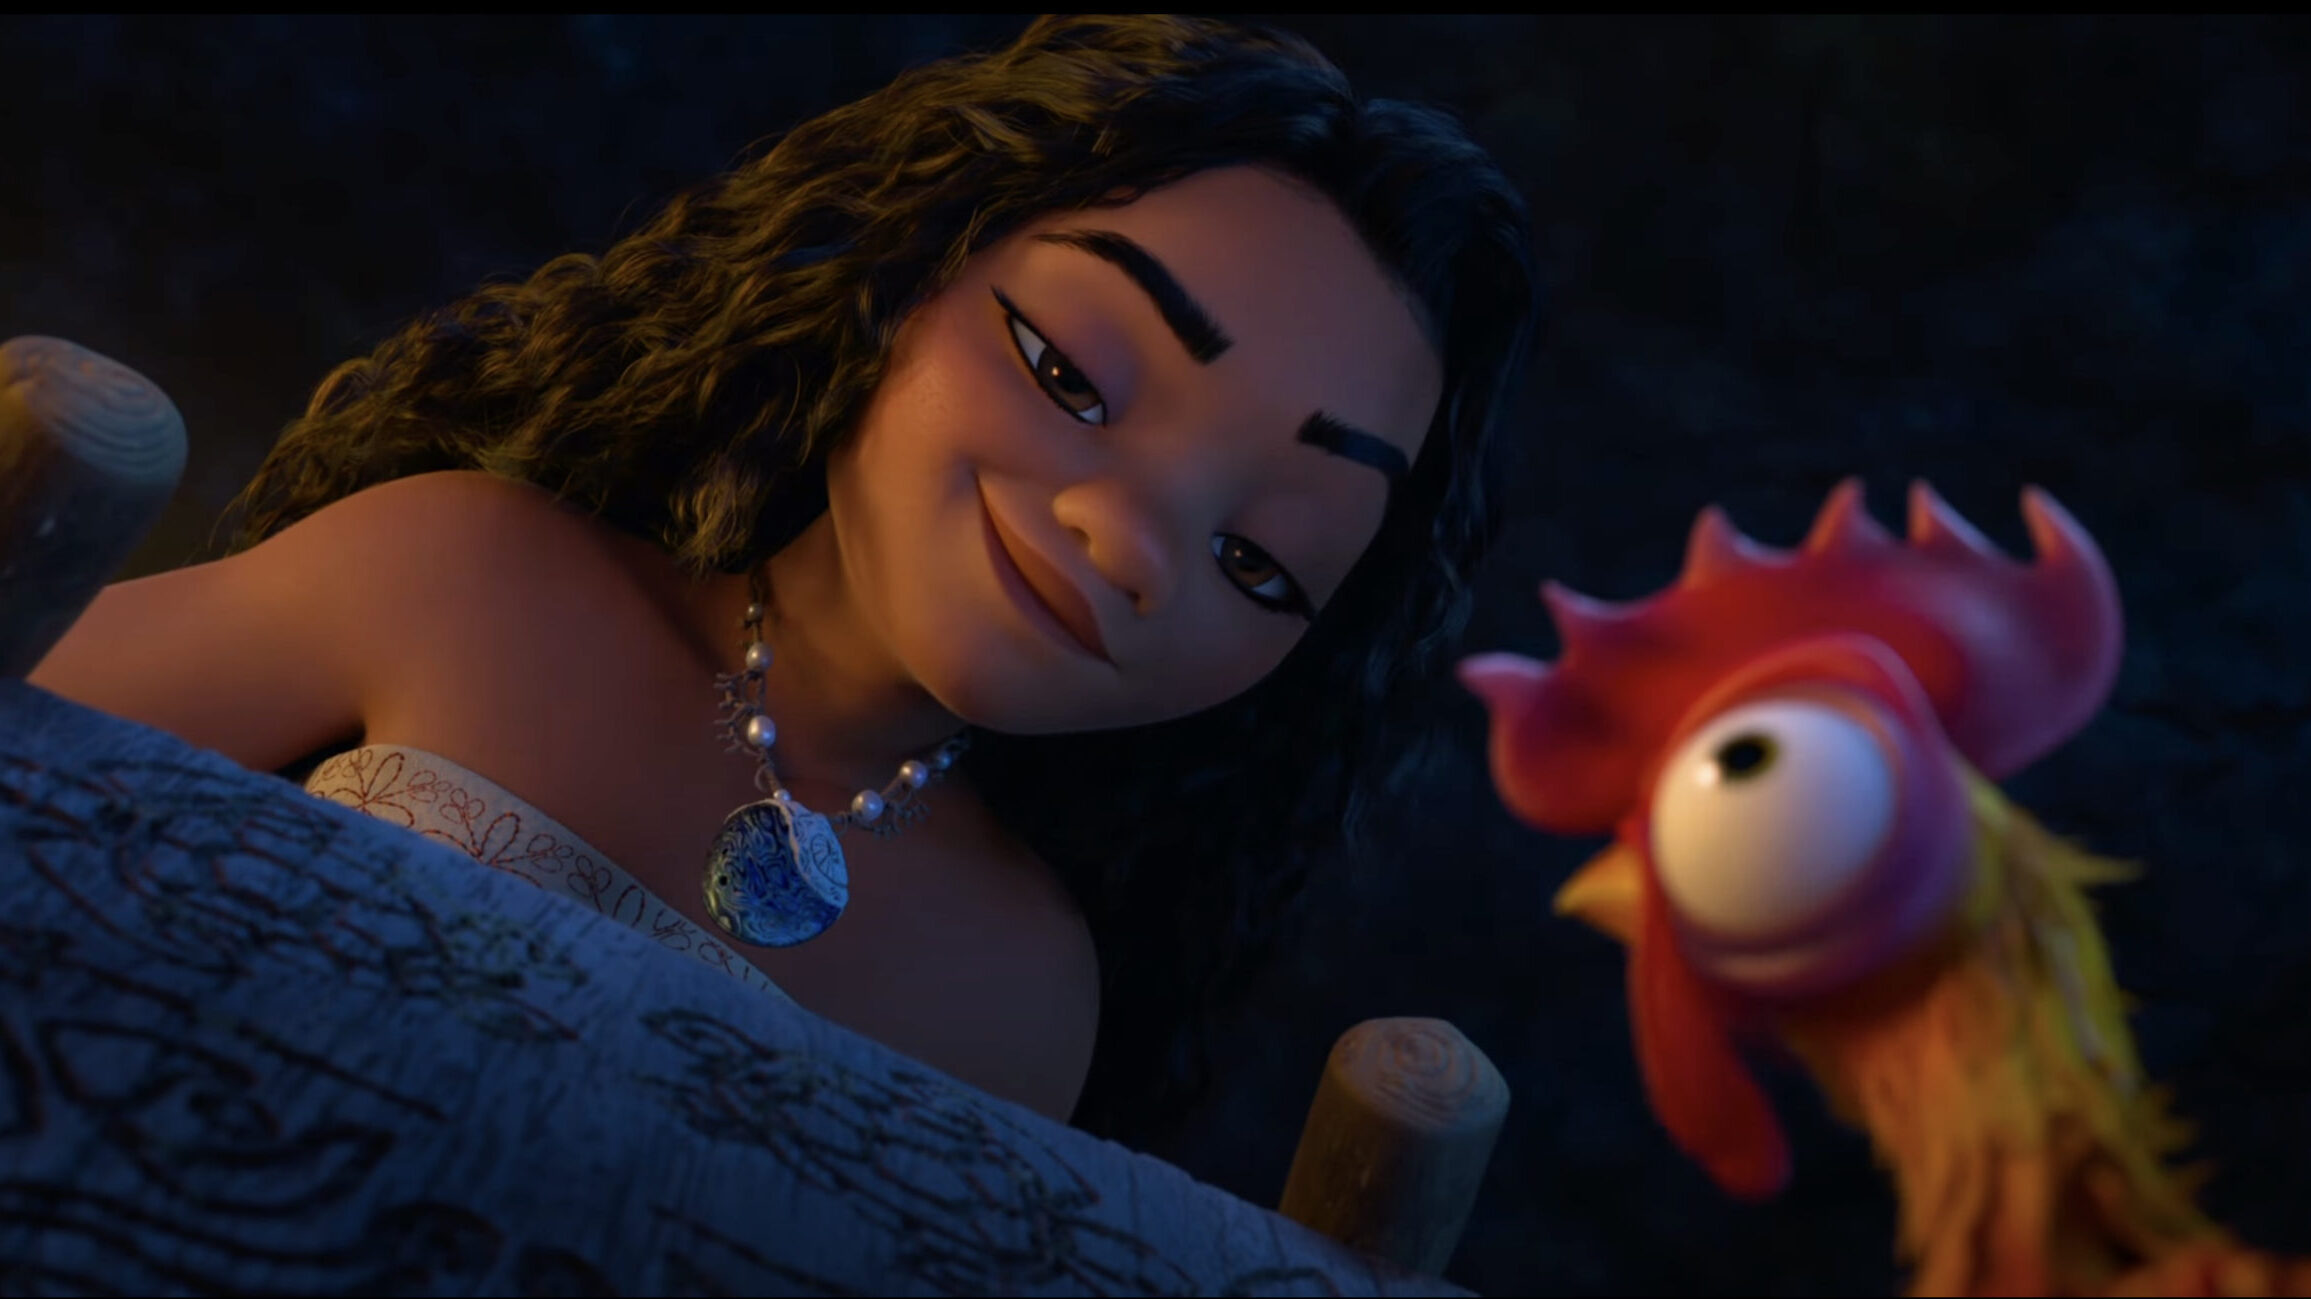 Industry Analysis: Hurdles For Wicked And Tiana Rise As Moana 2 Trailer Breaks Records